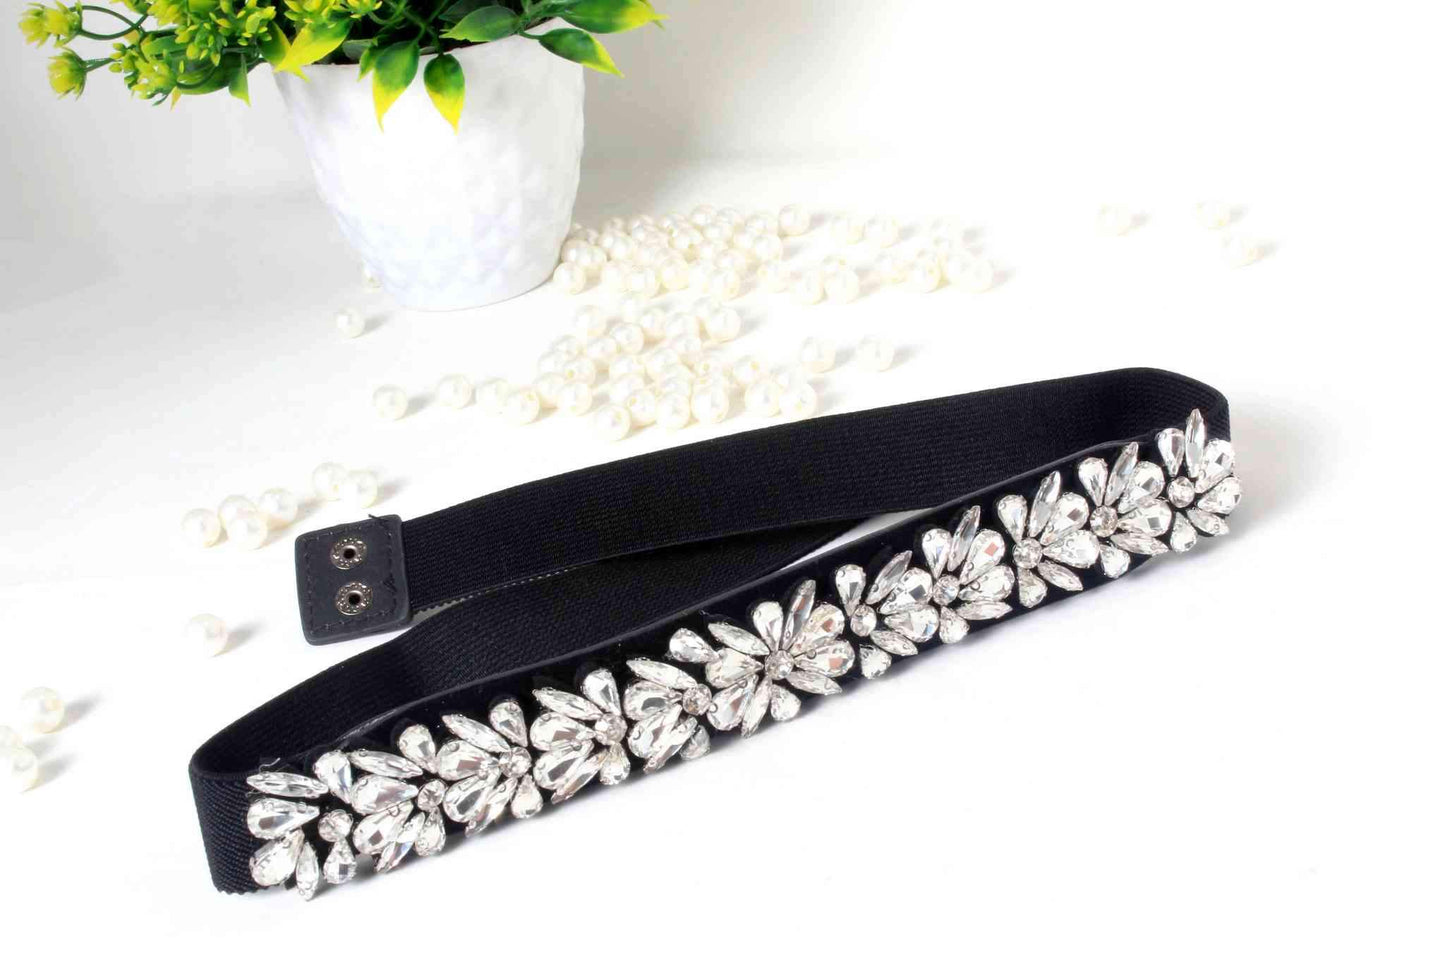 Indian Petals Stylish Fancy Rhinestones Beaded Fabric Party Belt for Girls, Women, Crystal White